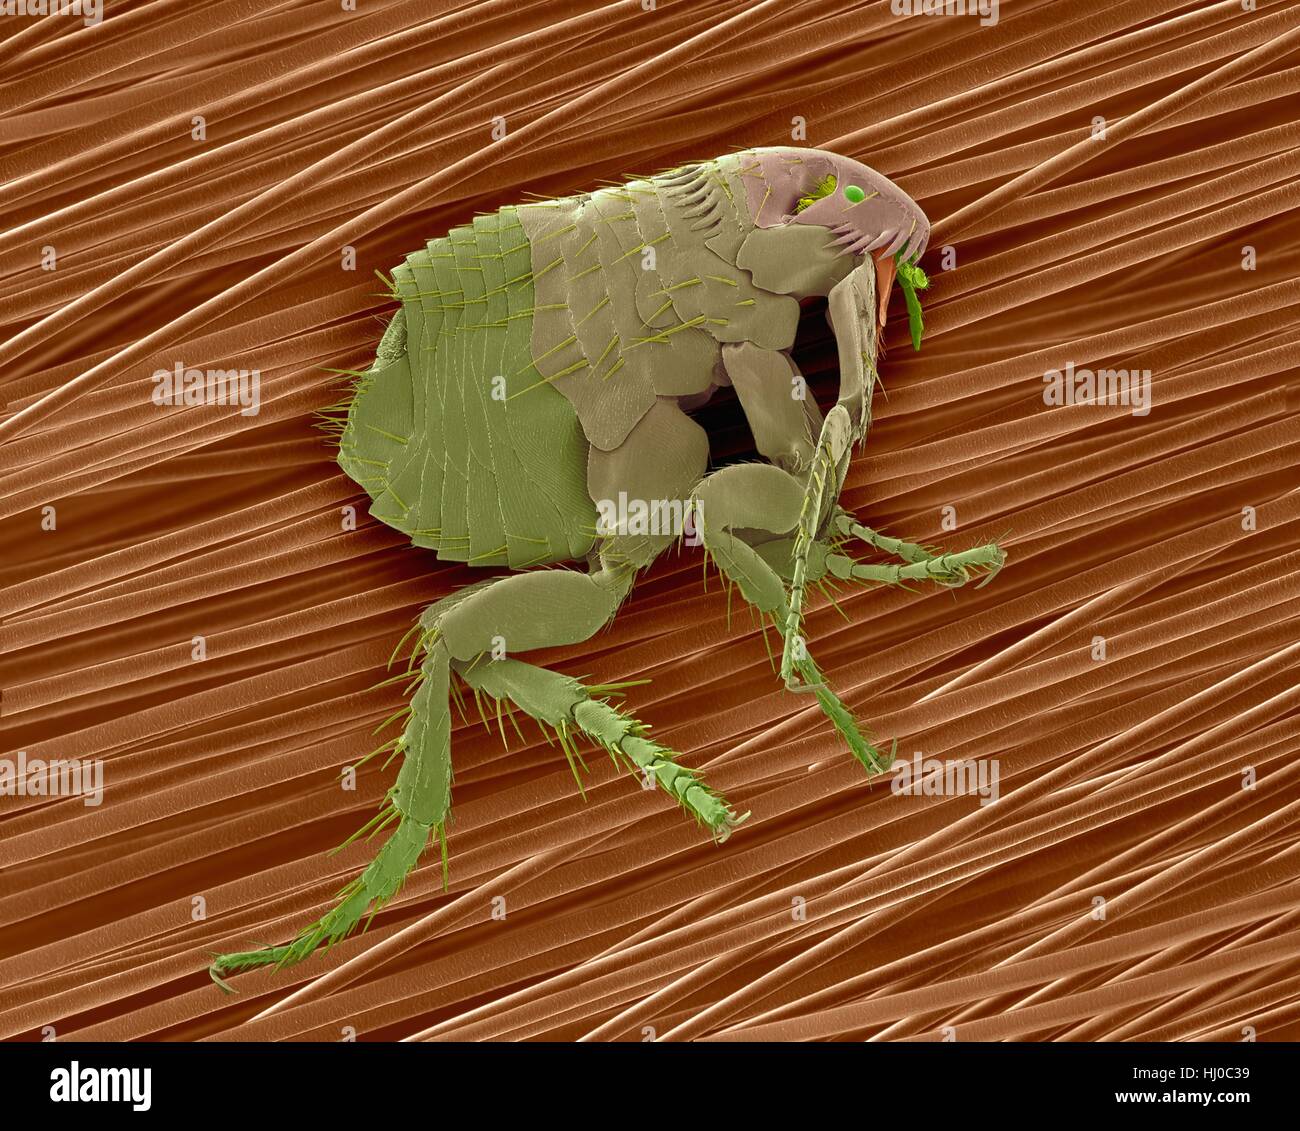 Coloured scanning electron micrograph (SEM) of common dog flea (Ctenocephalides canis) on dog hair.This flea lives as ectoparasite on wide variety of mammals,in particular domestic dog or cat.This flea serves as intermediate host of dog tapeworm (Dipylidium caninum).Although they feed on blood of Stock Photo